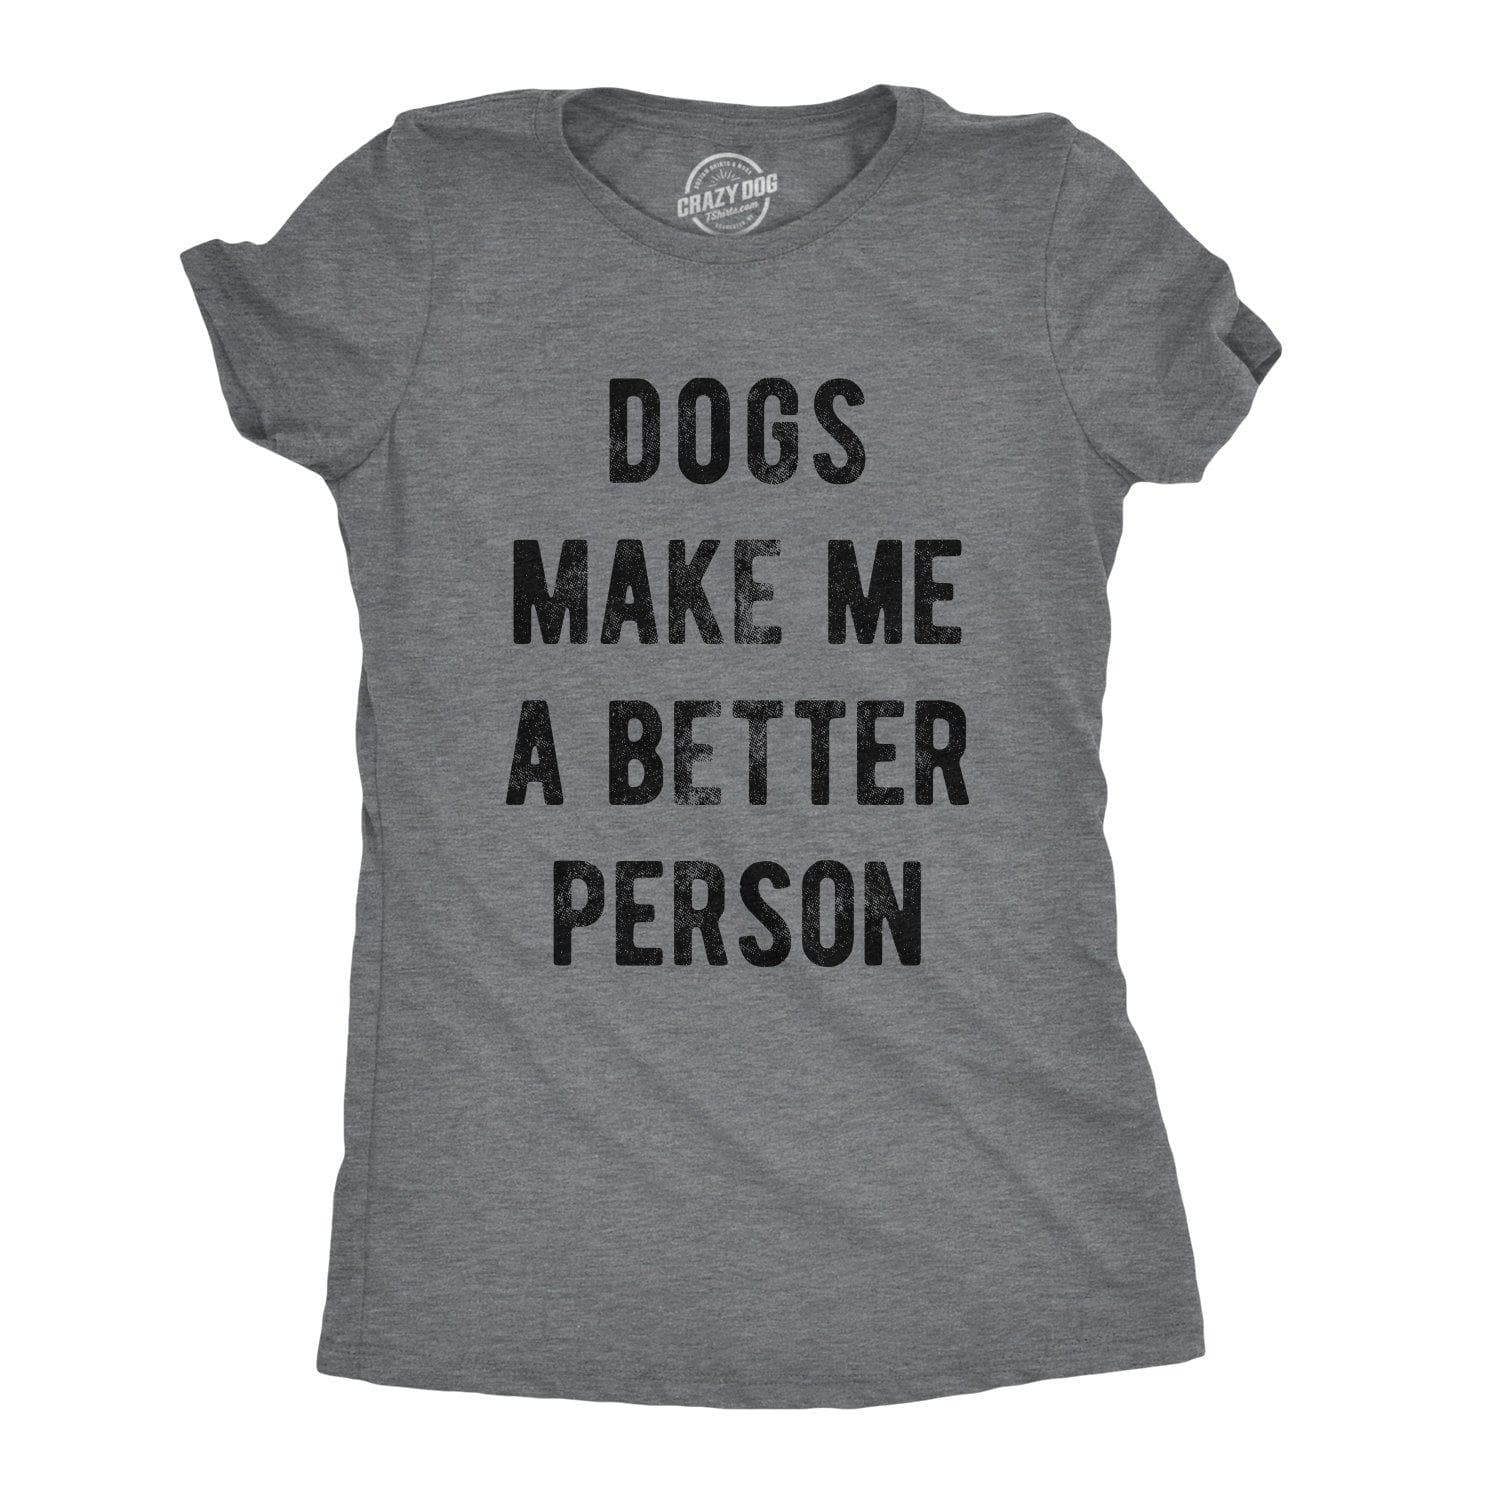 Dogs Make Me A Better Person Women's Tshirt - Crazy Dog T-Shirts